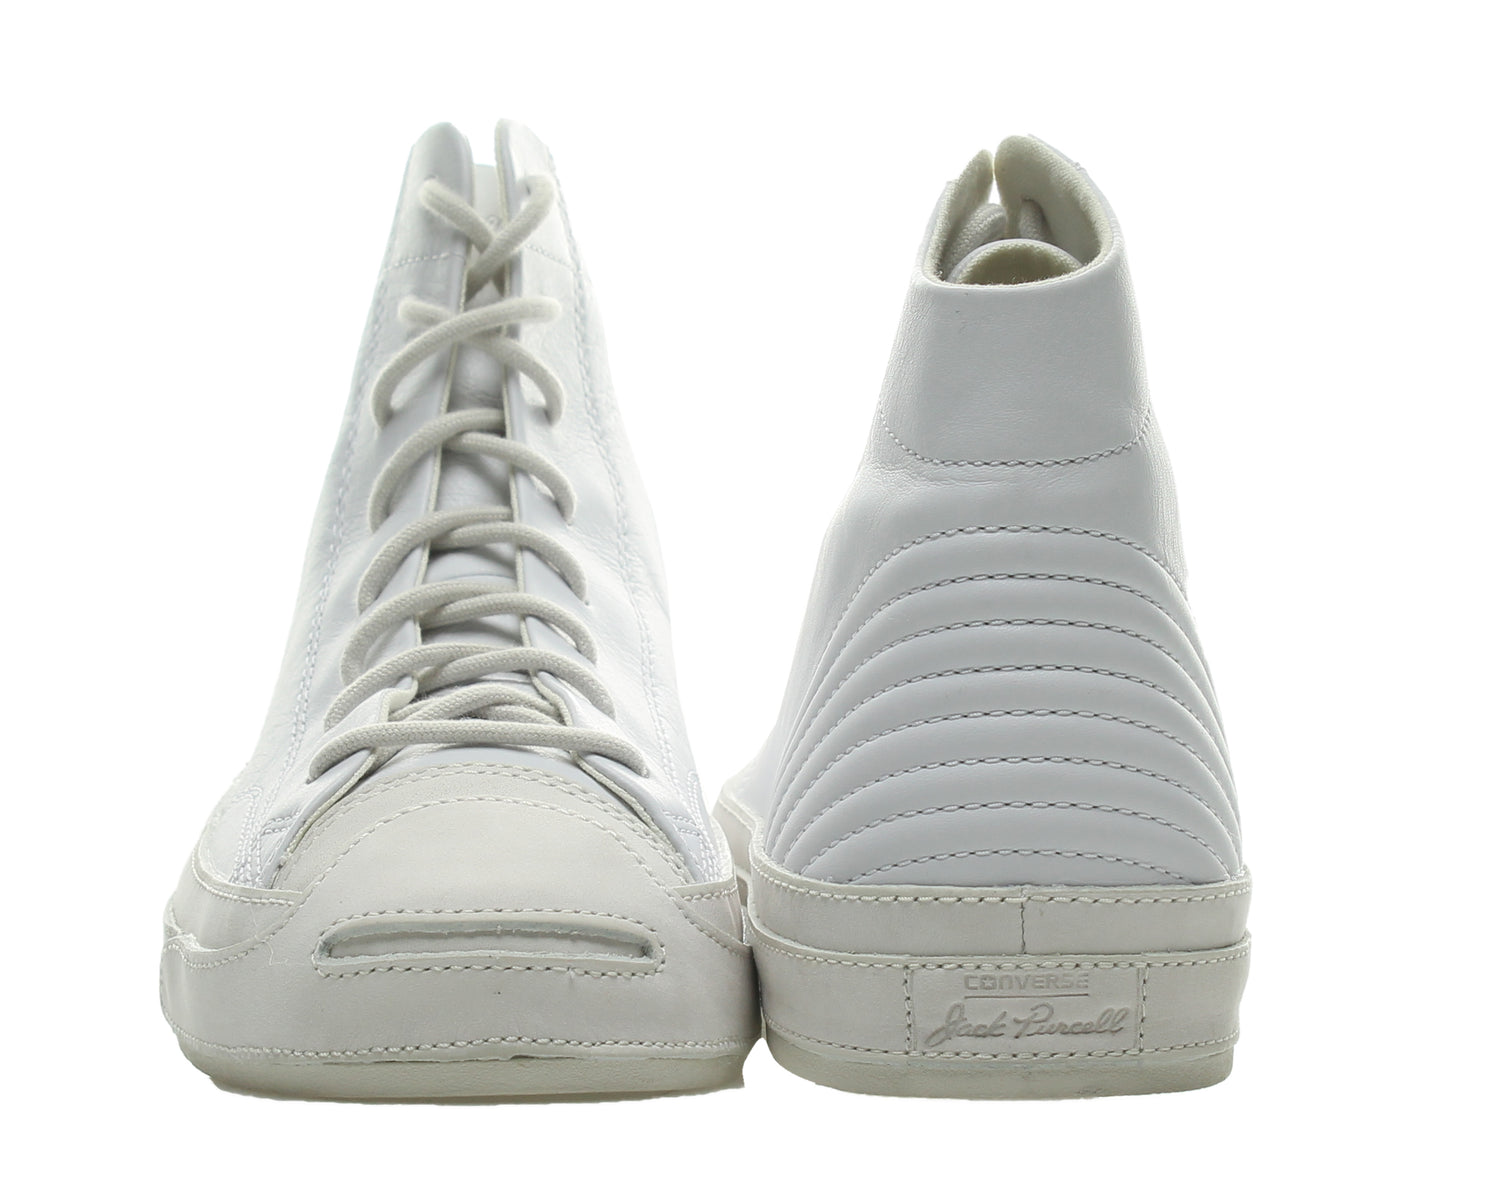 Converse Jack Purcell Quilt High Top Sneakers